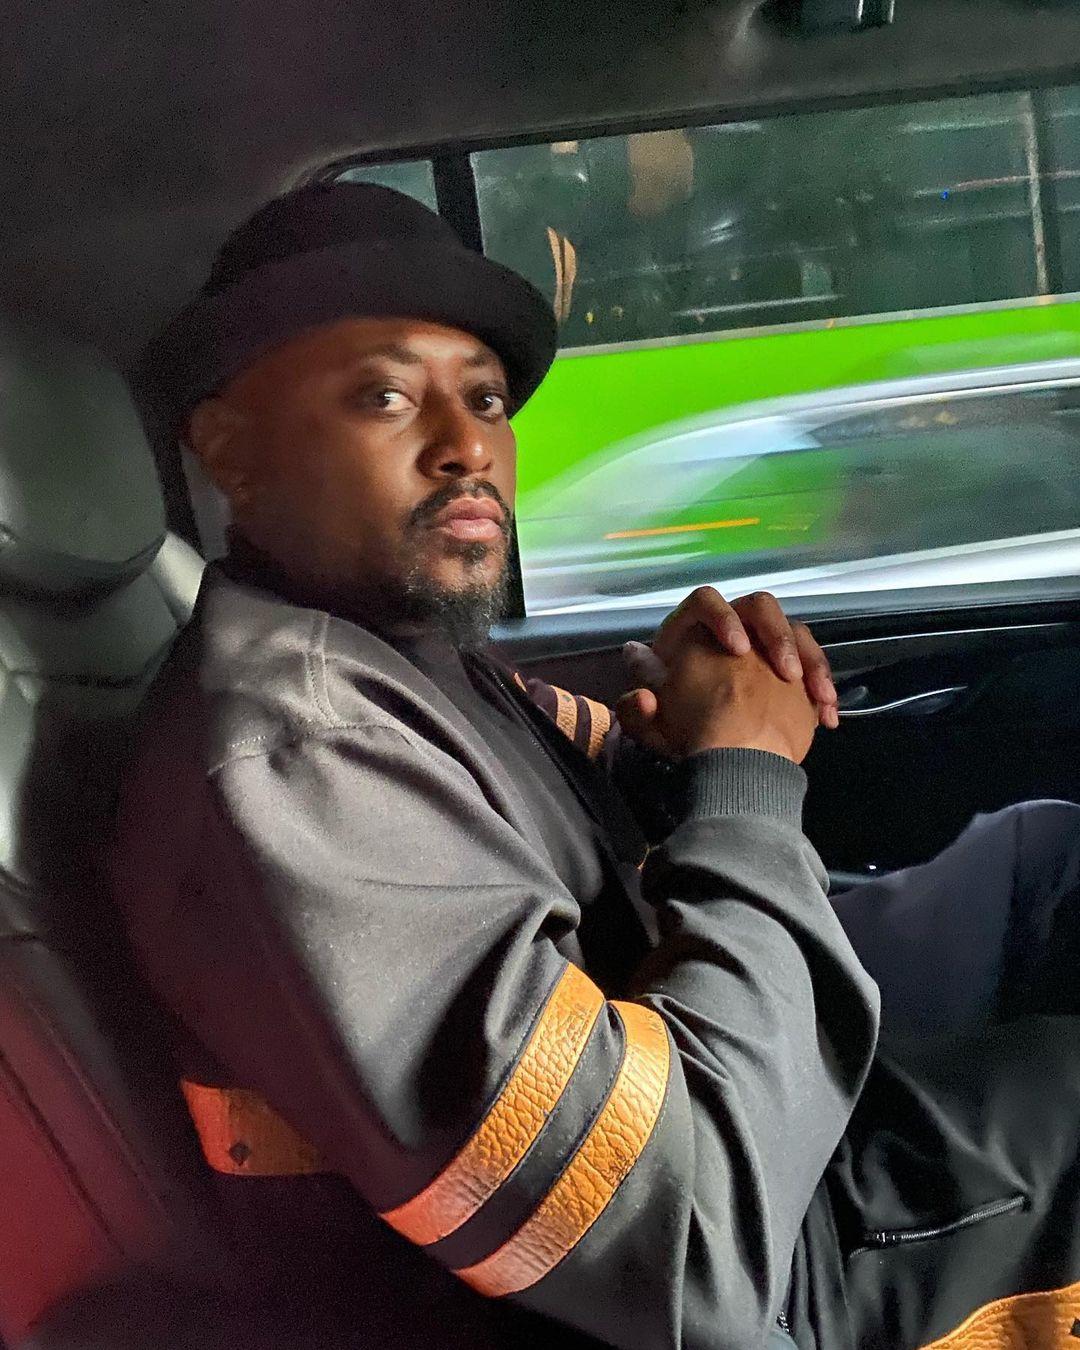 Omar Epps Responds To Obsessed Fan Who Filed Restraining Order Against Him